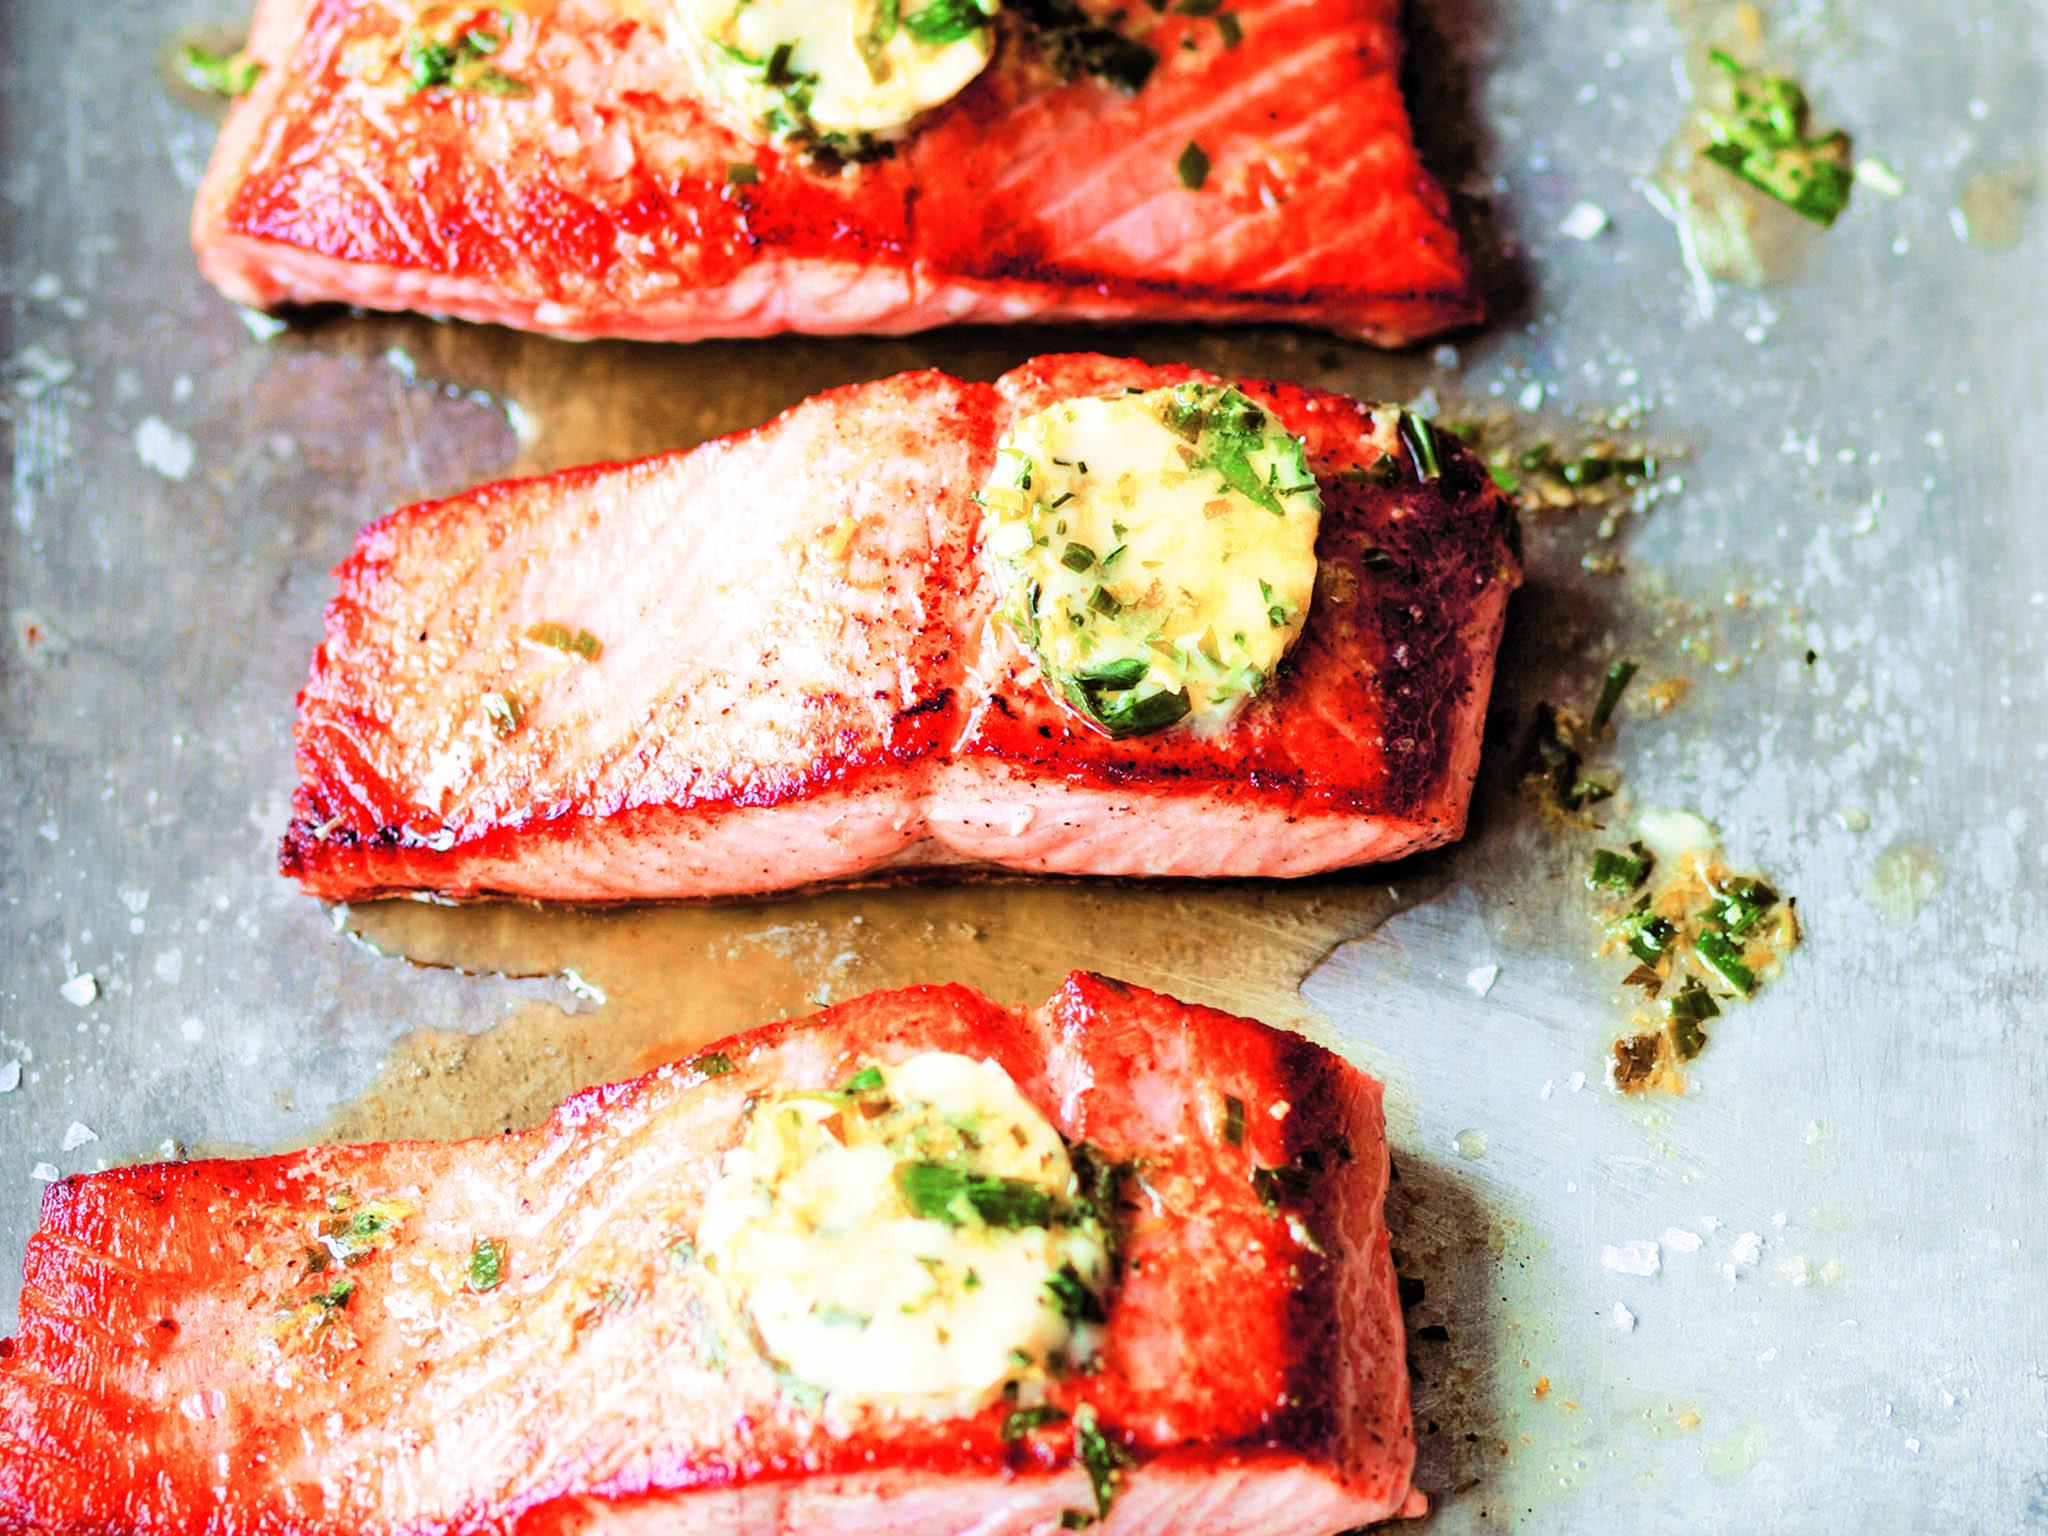 This salted salmon with tarragon butter recipe from the book uses old traditions of salting fish to preserve it, but here its salted just enough to ensure the umami tastes